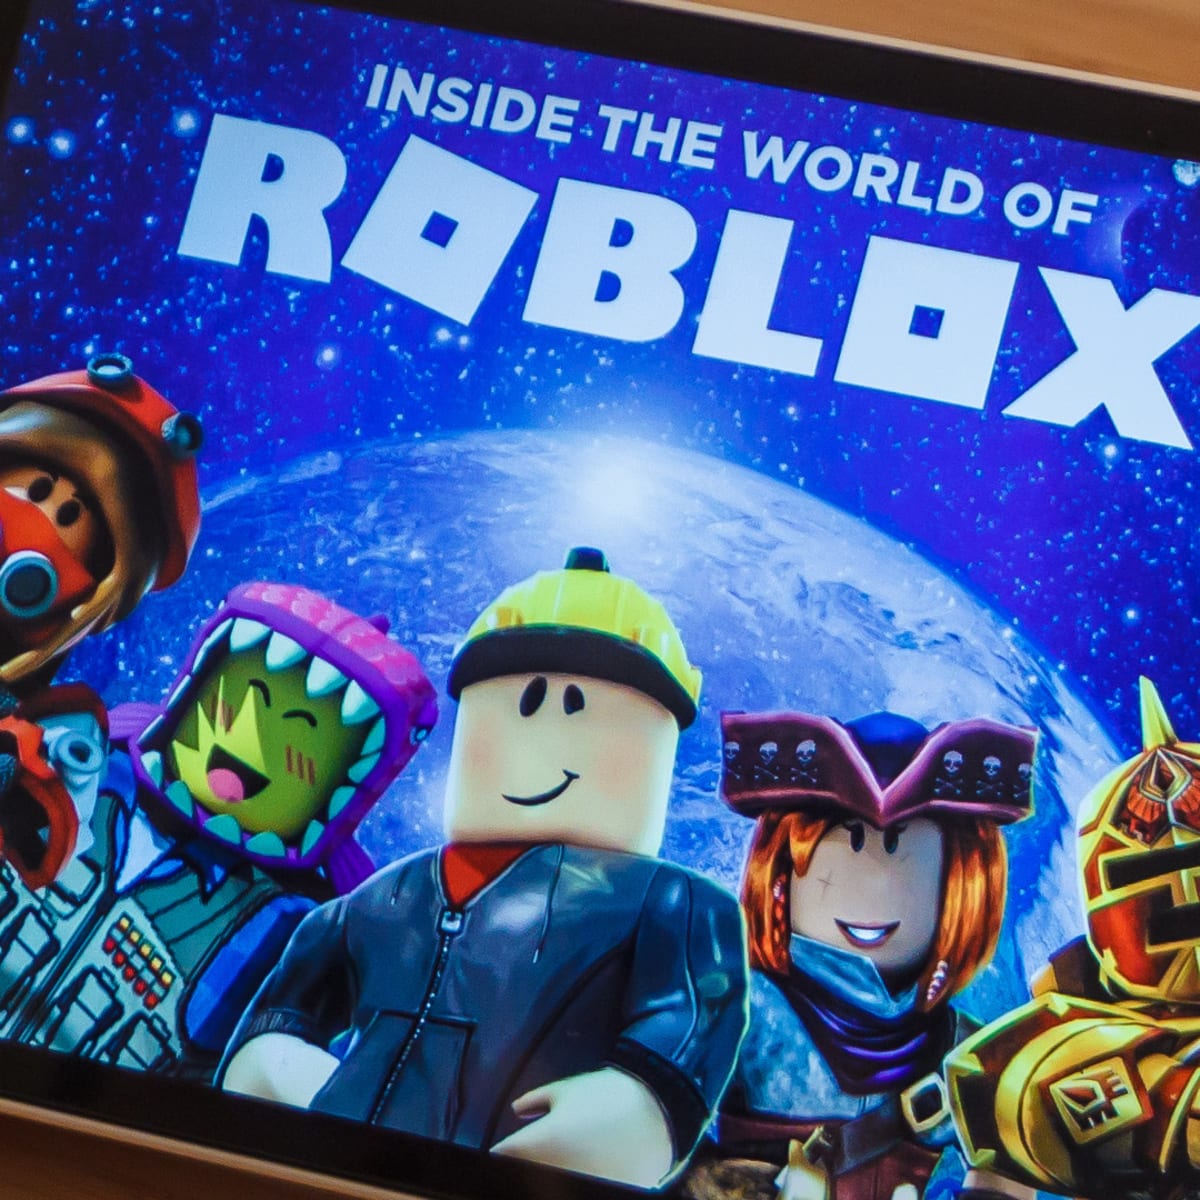 Roblox goes public on New York Stock Exchange, valued at almost